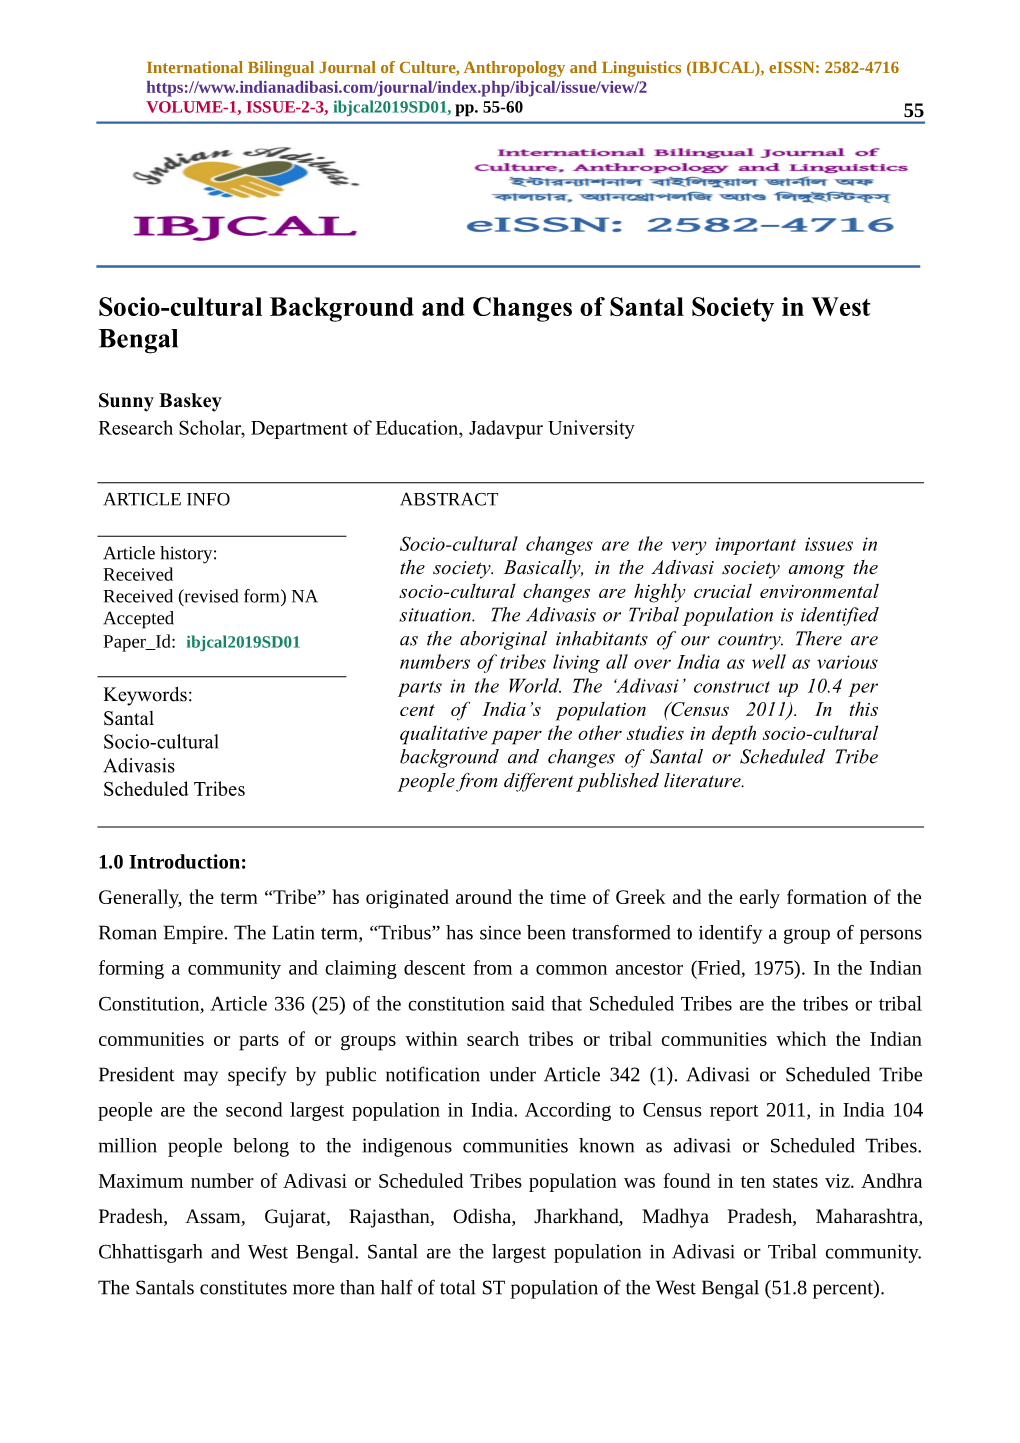 Socio-Cultural Background and Changes of Santal Society in West Bengal